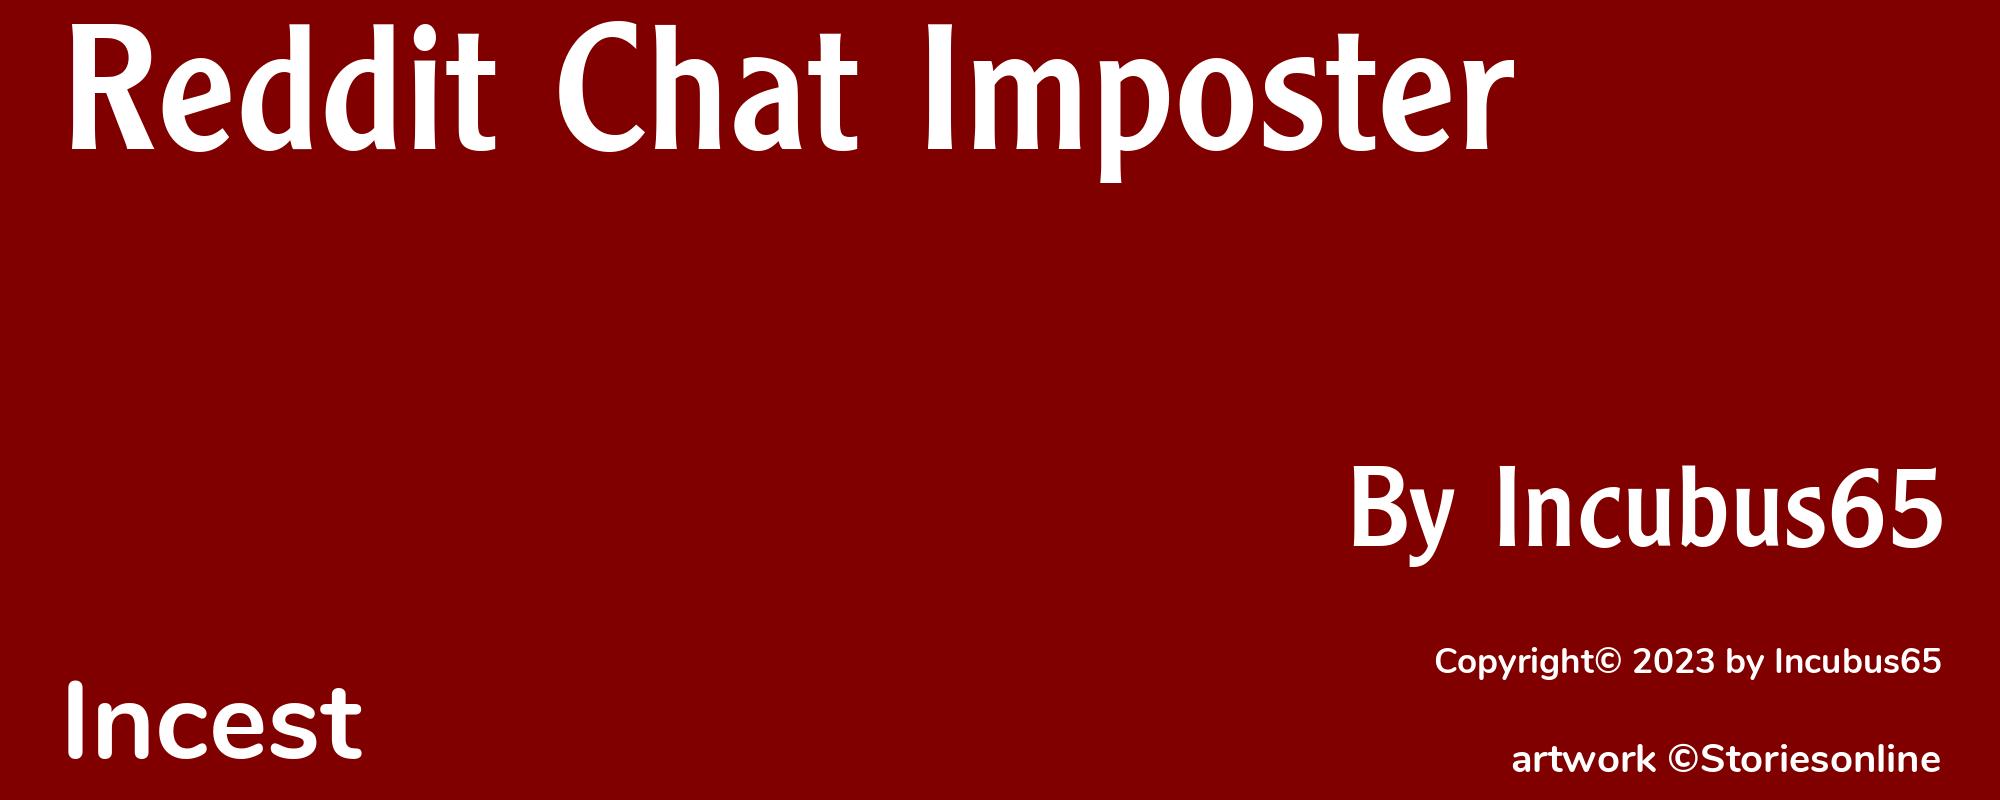 Reddit Chat Imposter - Cover